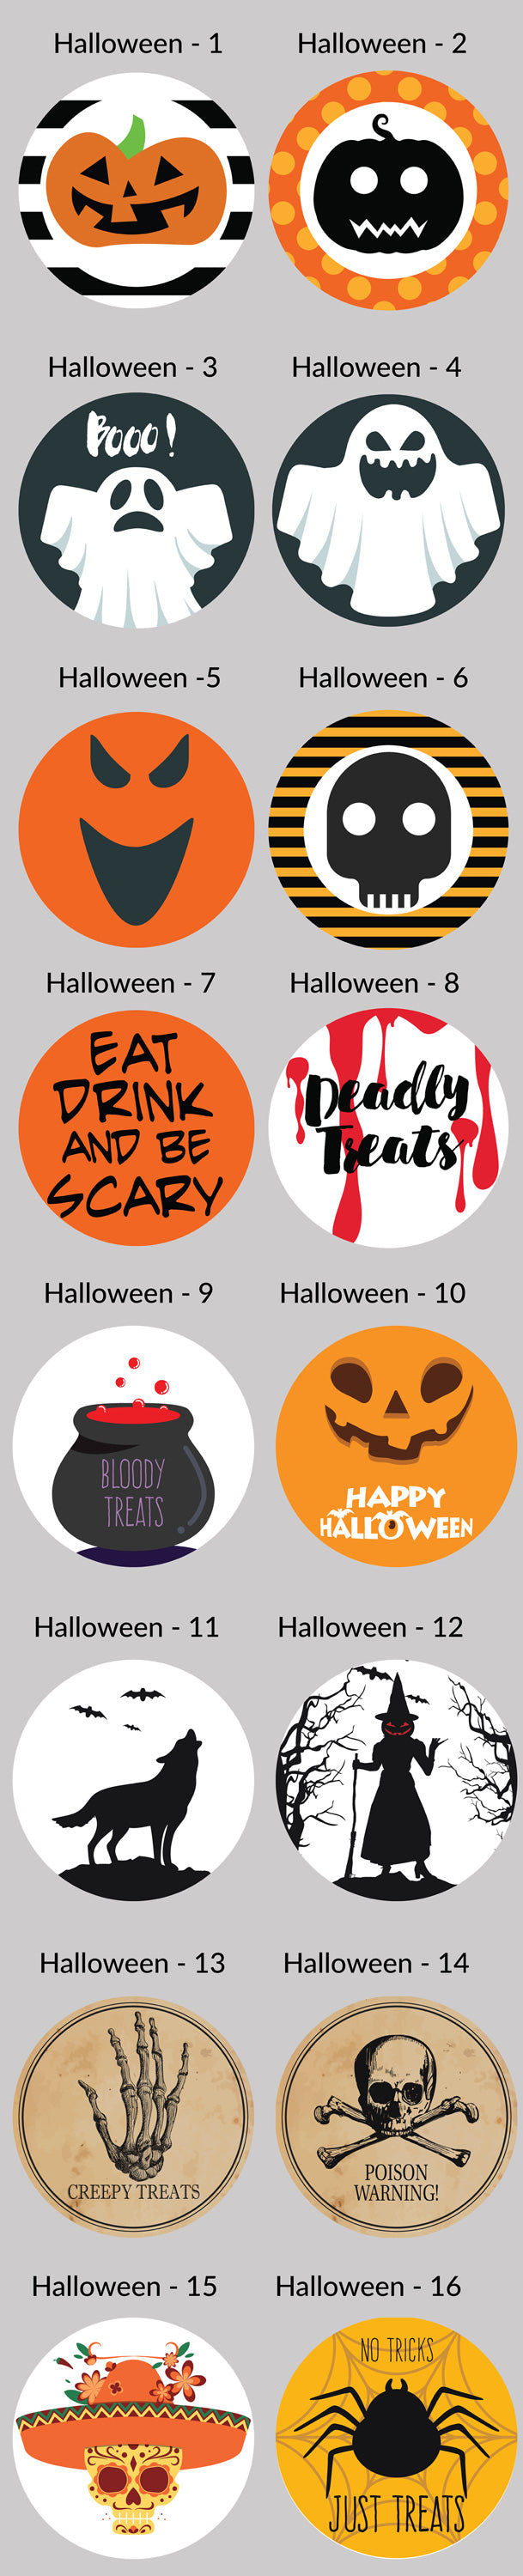 1.5 Inch Halloween Party Circle Label Stickers for Party Favors &amp; Invitations (Pre-Set Designed, 24 Labels) - PaperLanternStore.com - Paper Lanterns, Decor, Party Lights &amp; More